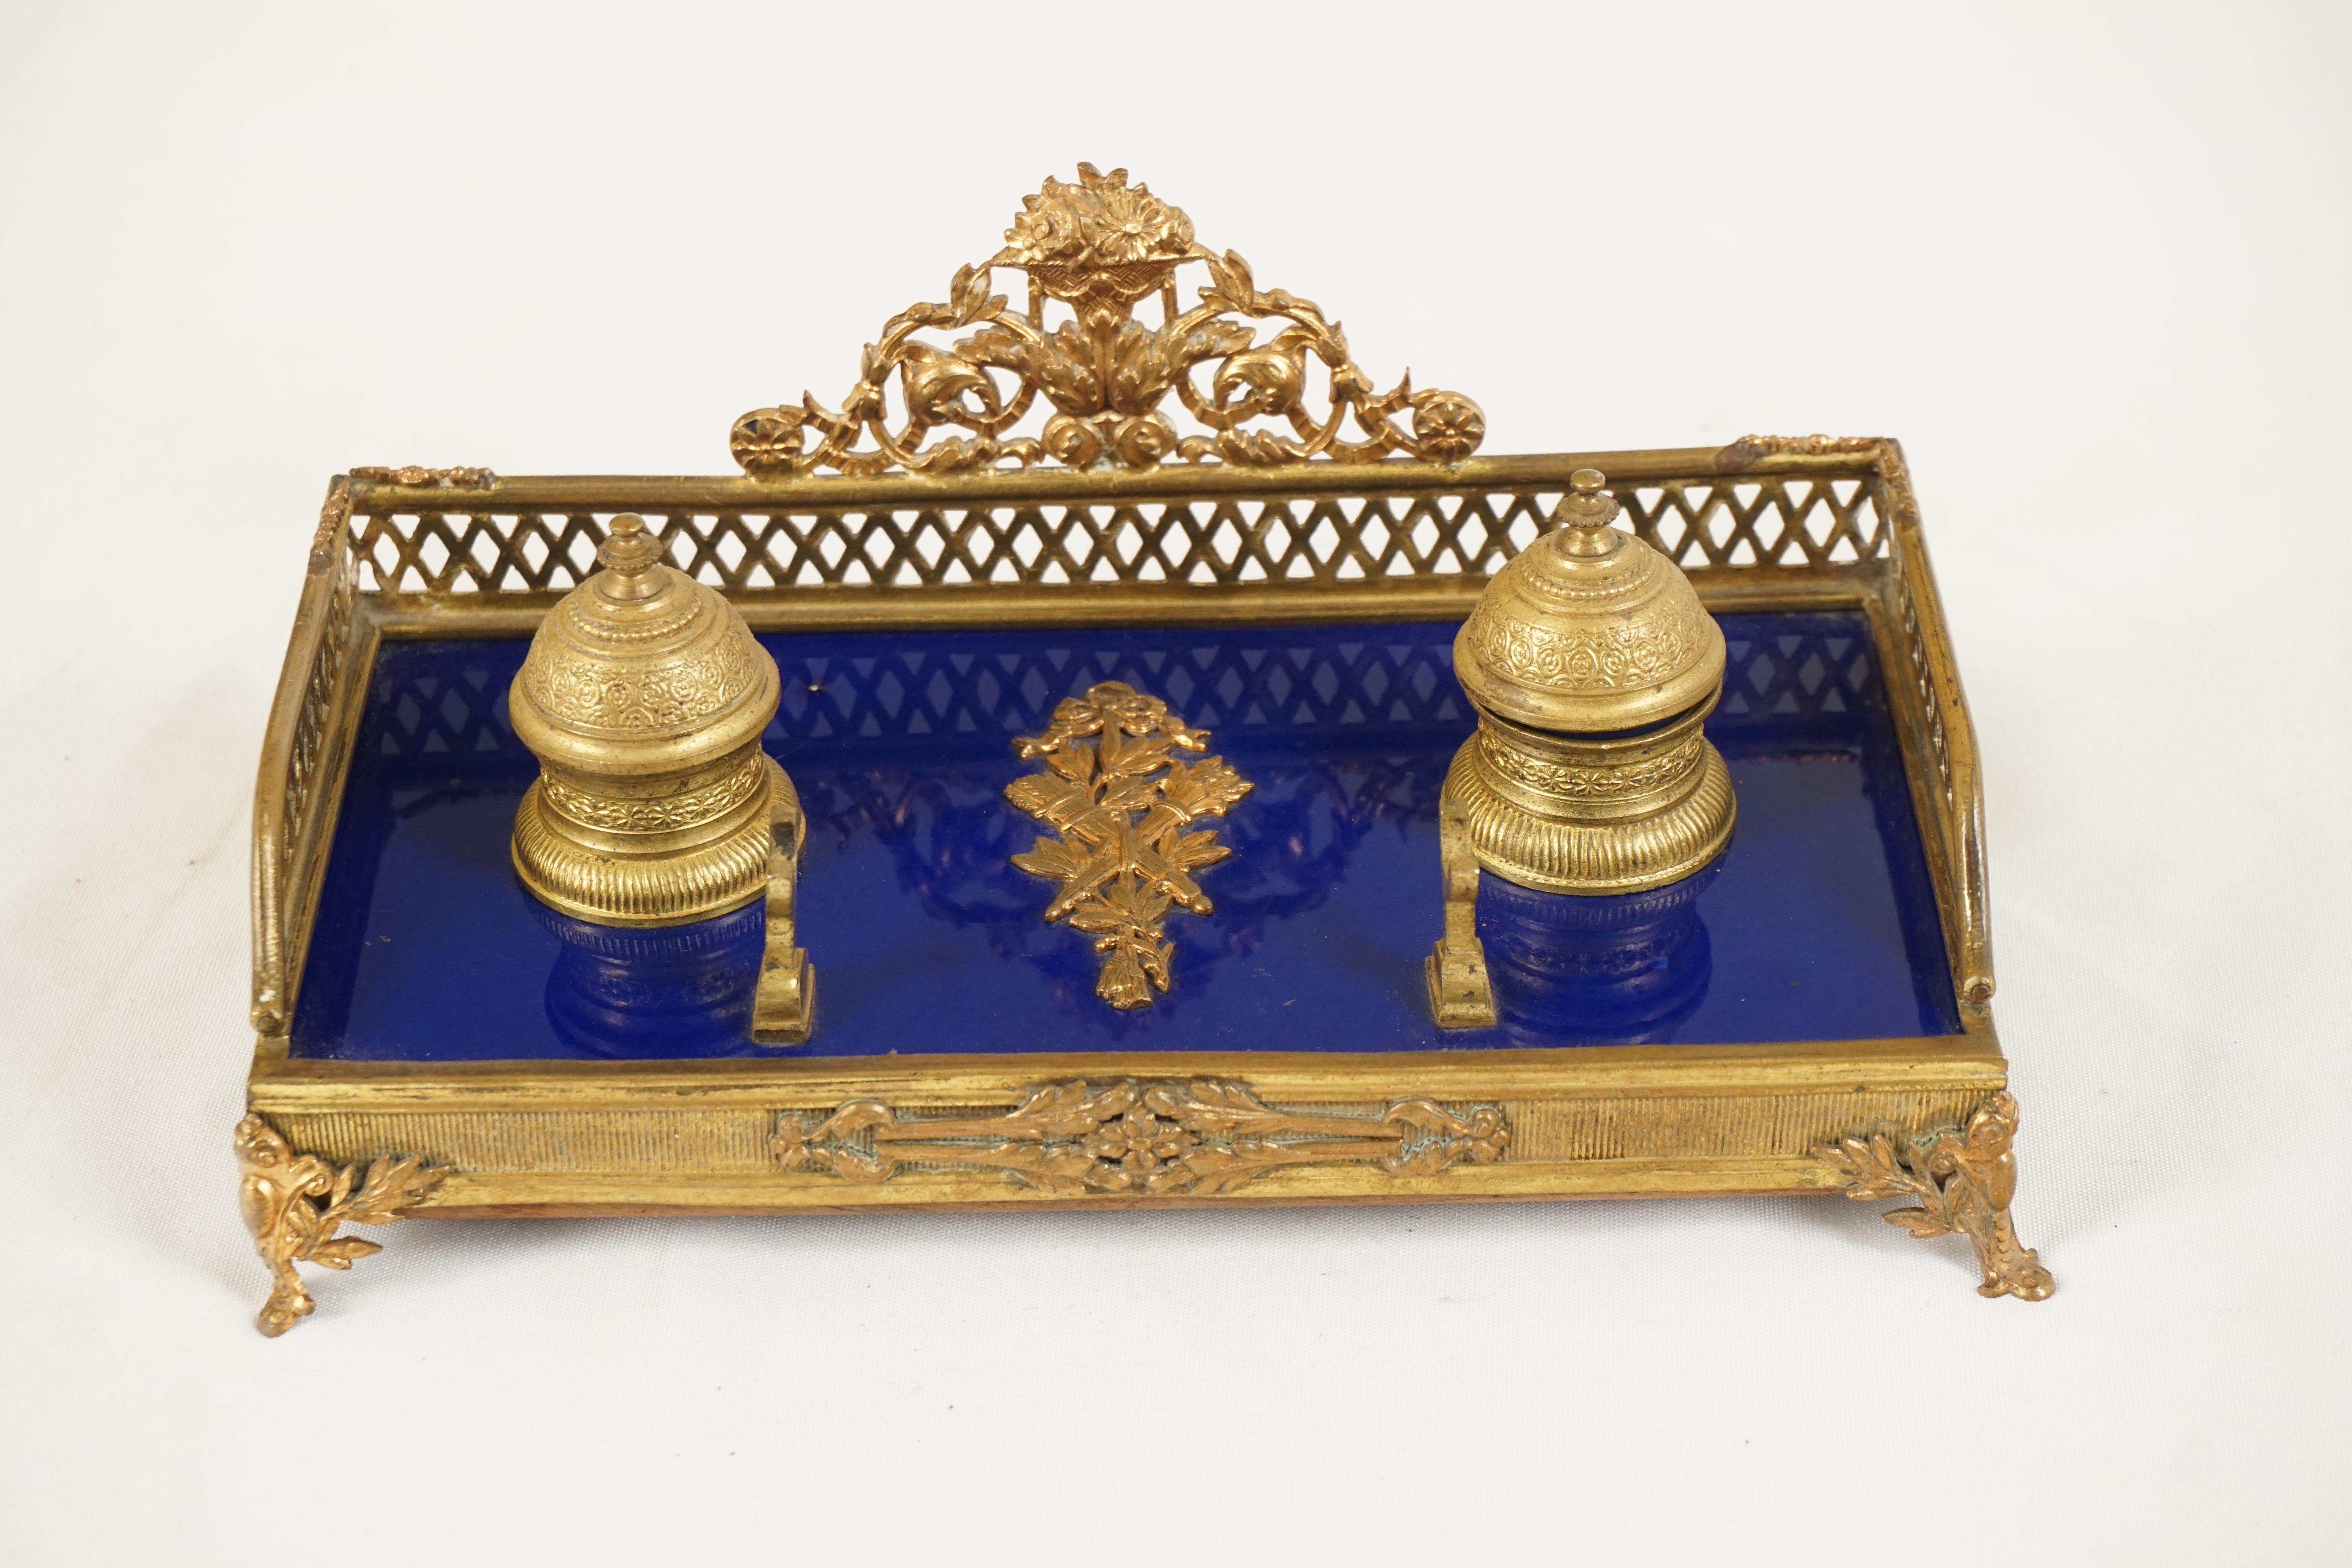 Antique French Empire style ink stand, desk inkwell, France 1880, H527

France 1880
Floral mounts to the back
Gilt pierced three quarter gallery on top
Pair of gilt inkwells with lids and inserts
Pen holder to the front
All standing on a blue